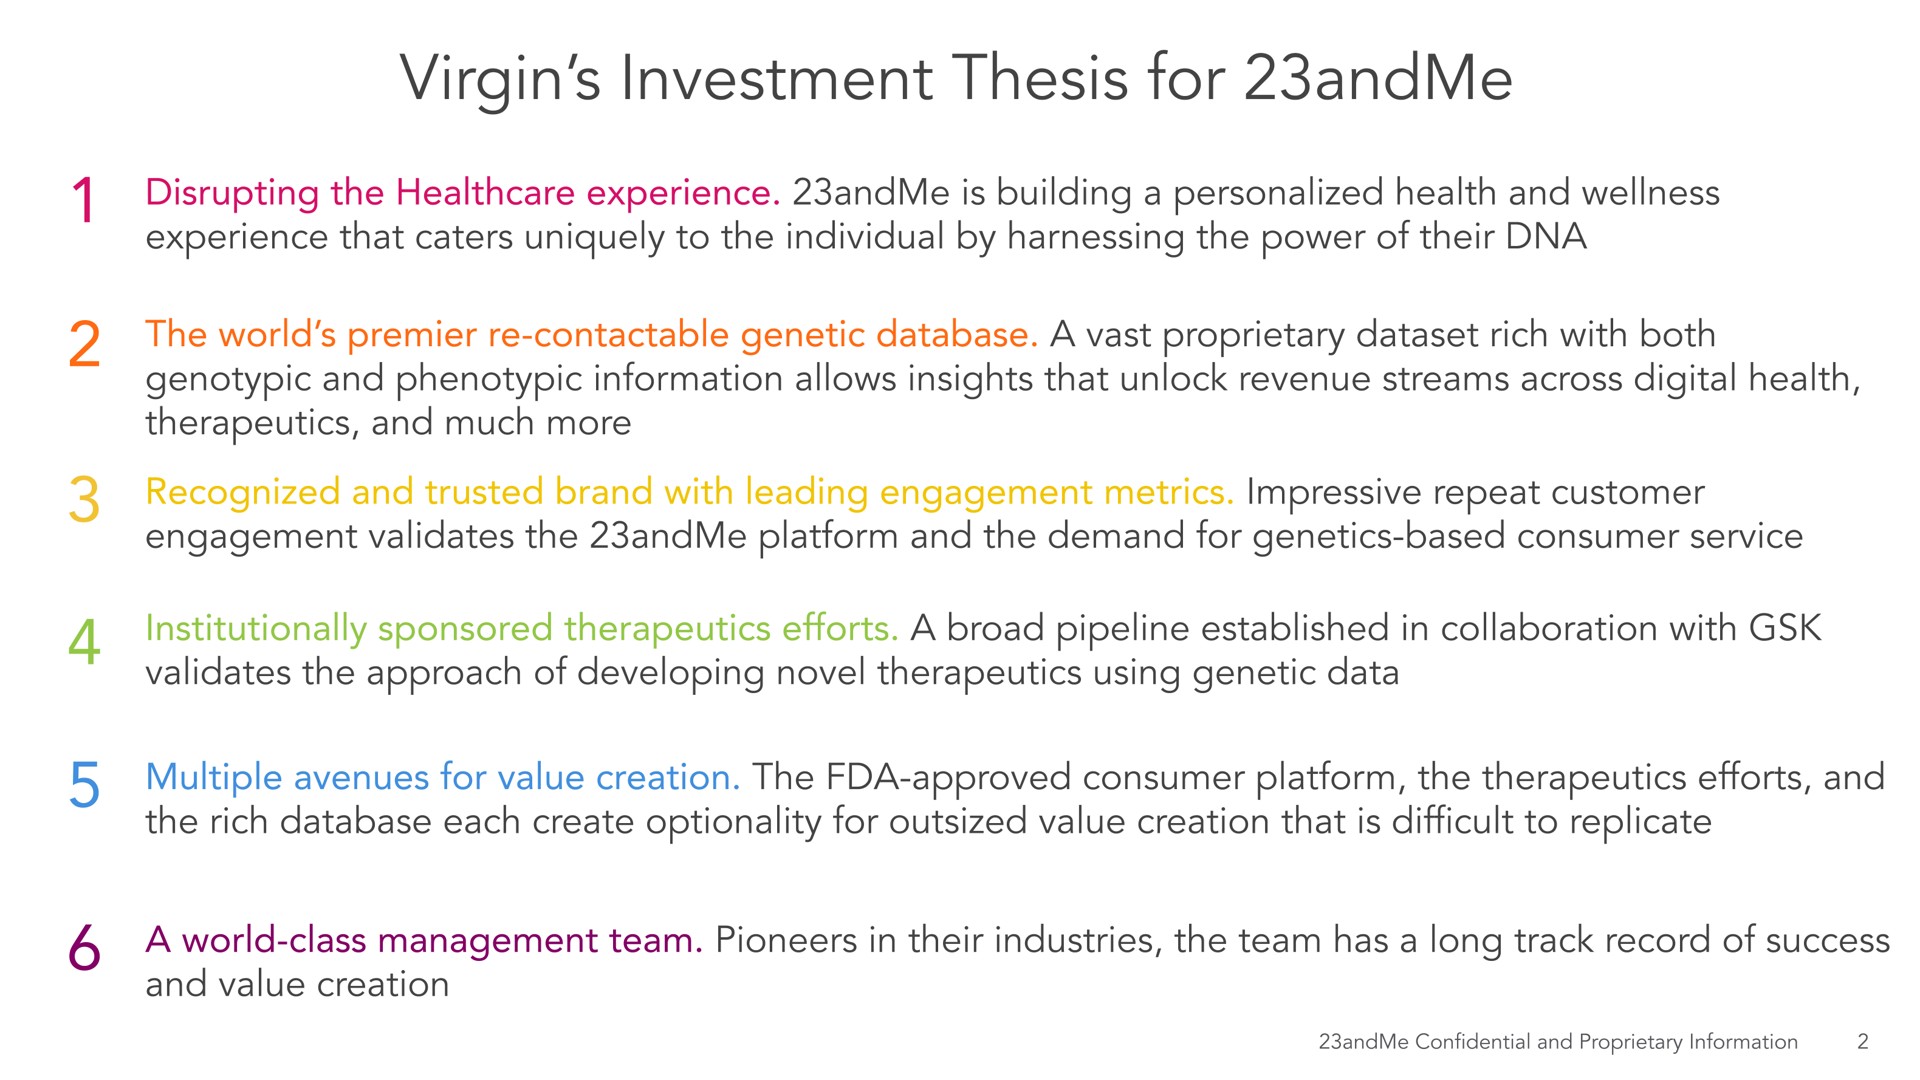 virgin investment thesis for | 23andMe